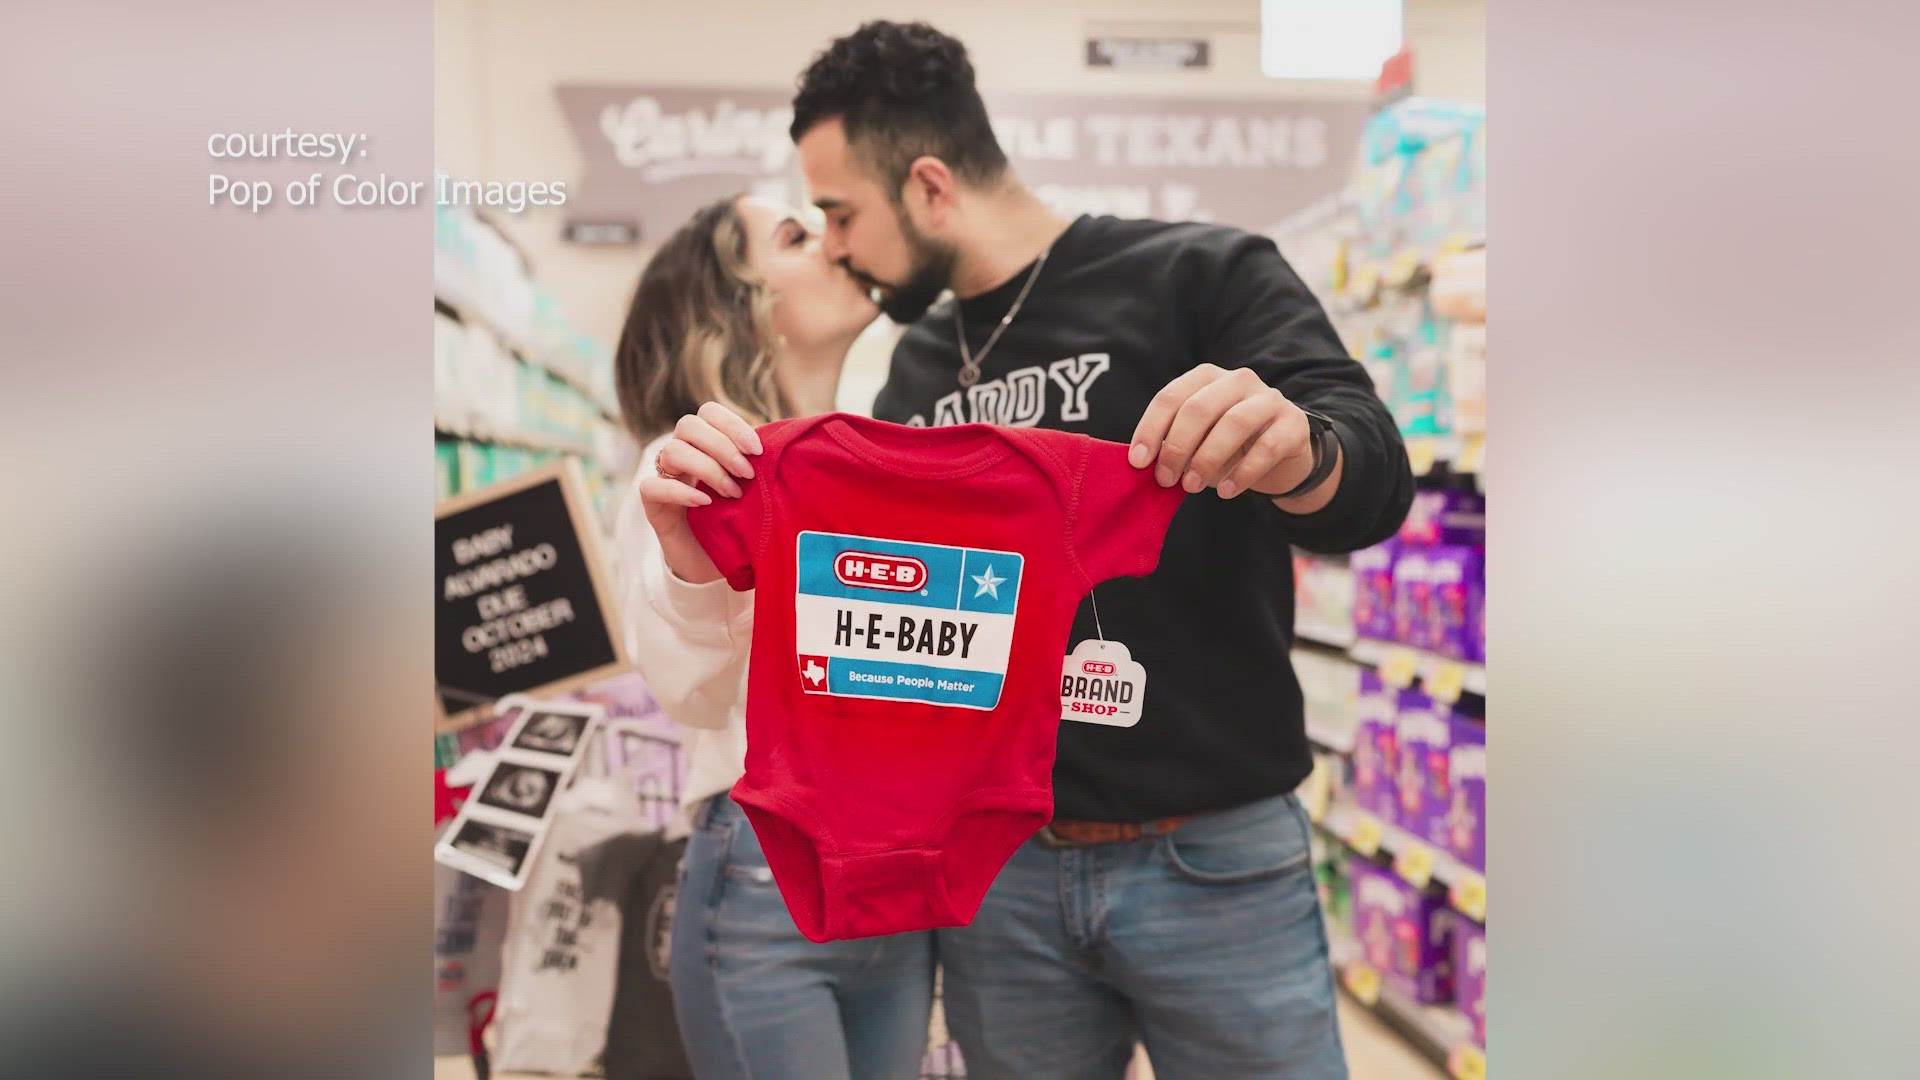 The young San Antonio couple wanted to announce their pregnancy in a unique way, so they incorporated the husband's employer, H-E-B, into a photoshoot.